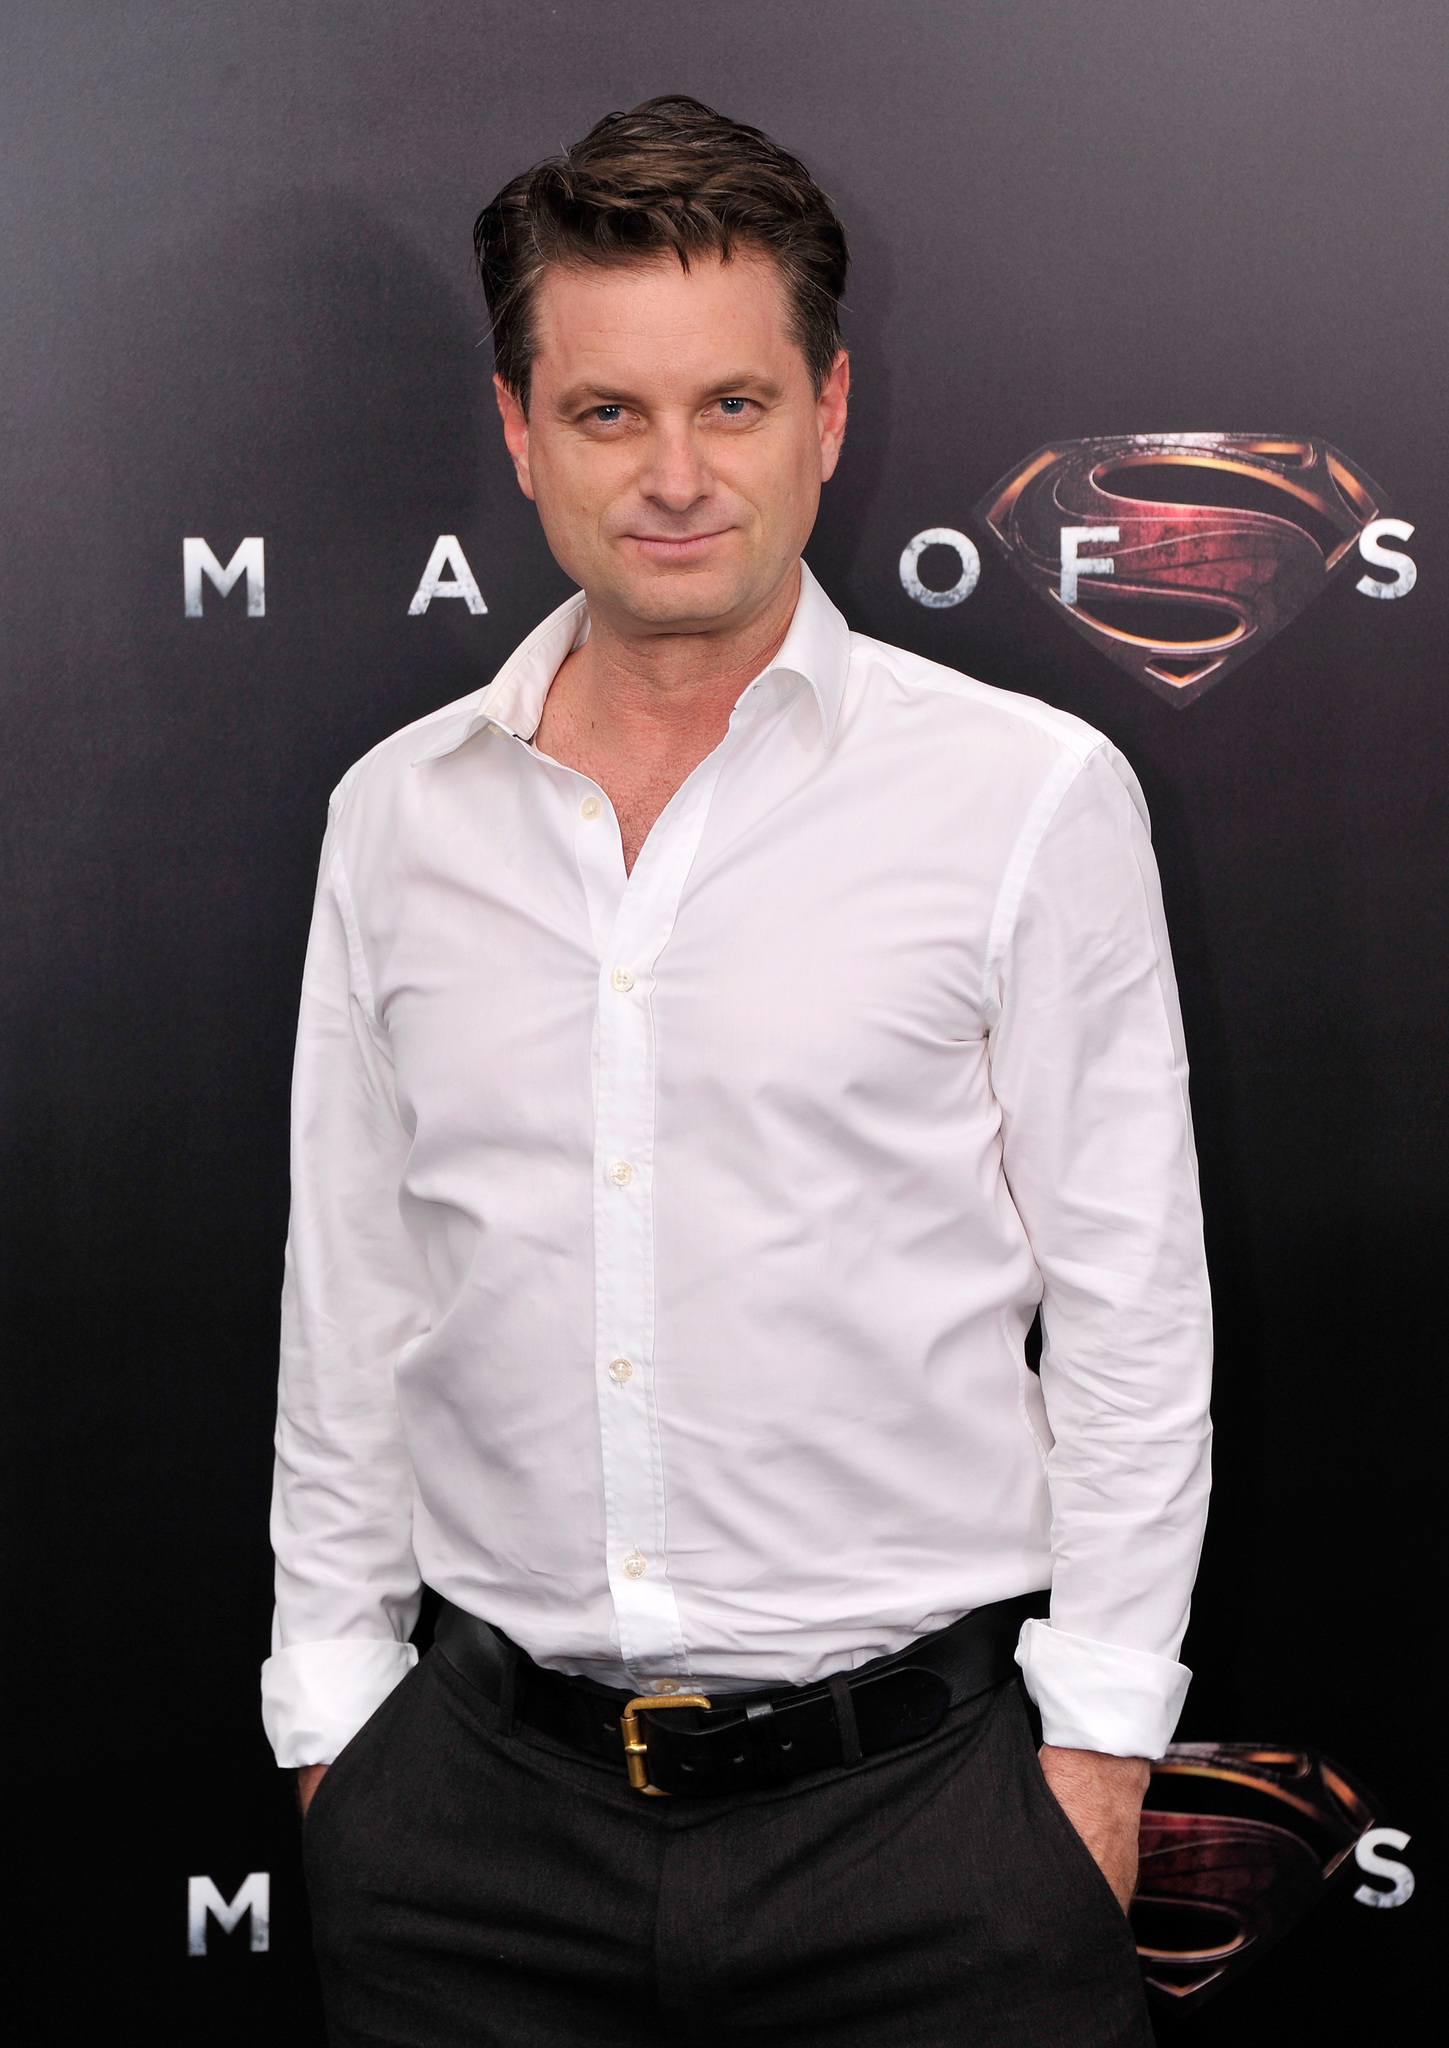 Shea Whigham at event of Zmogus is plieno (2013)